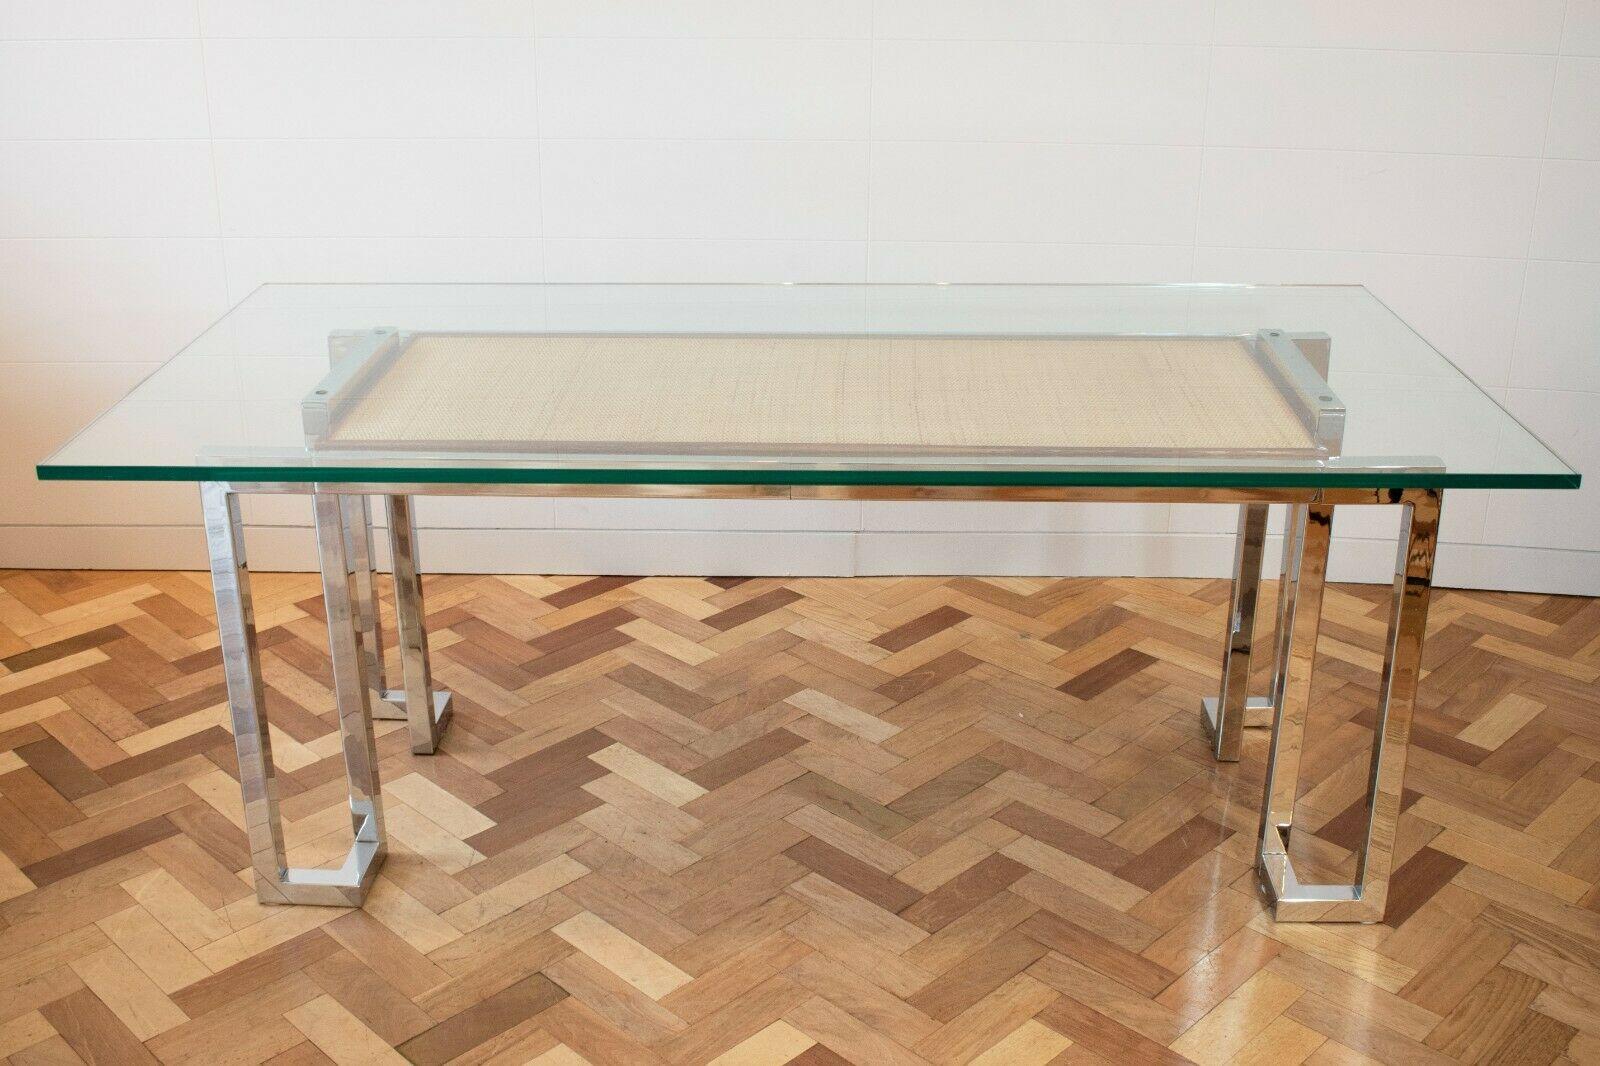 Other 1970s Chrome, Glass and Rattan Desk by Pieff Lisse from the Mandarin Collection